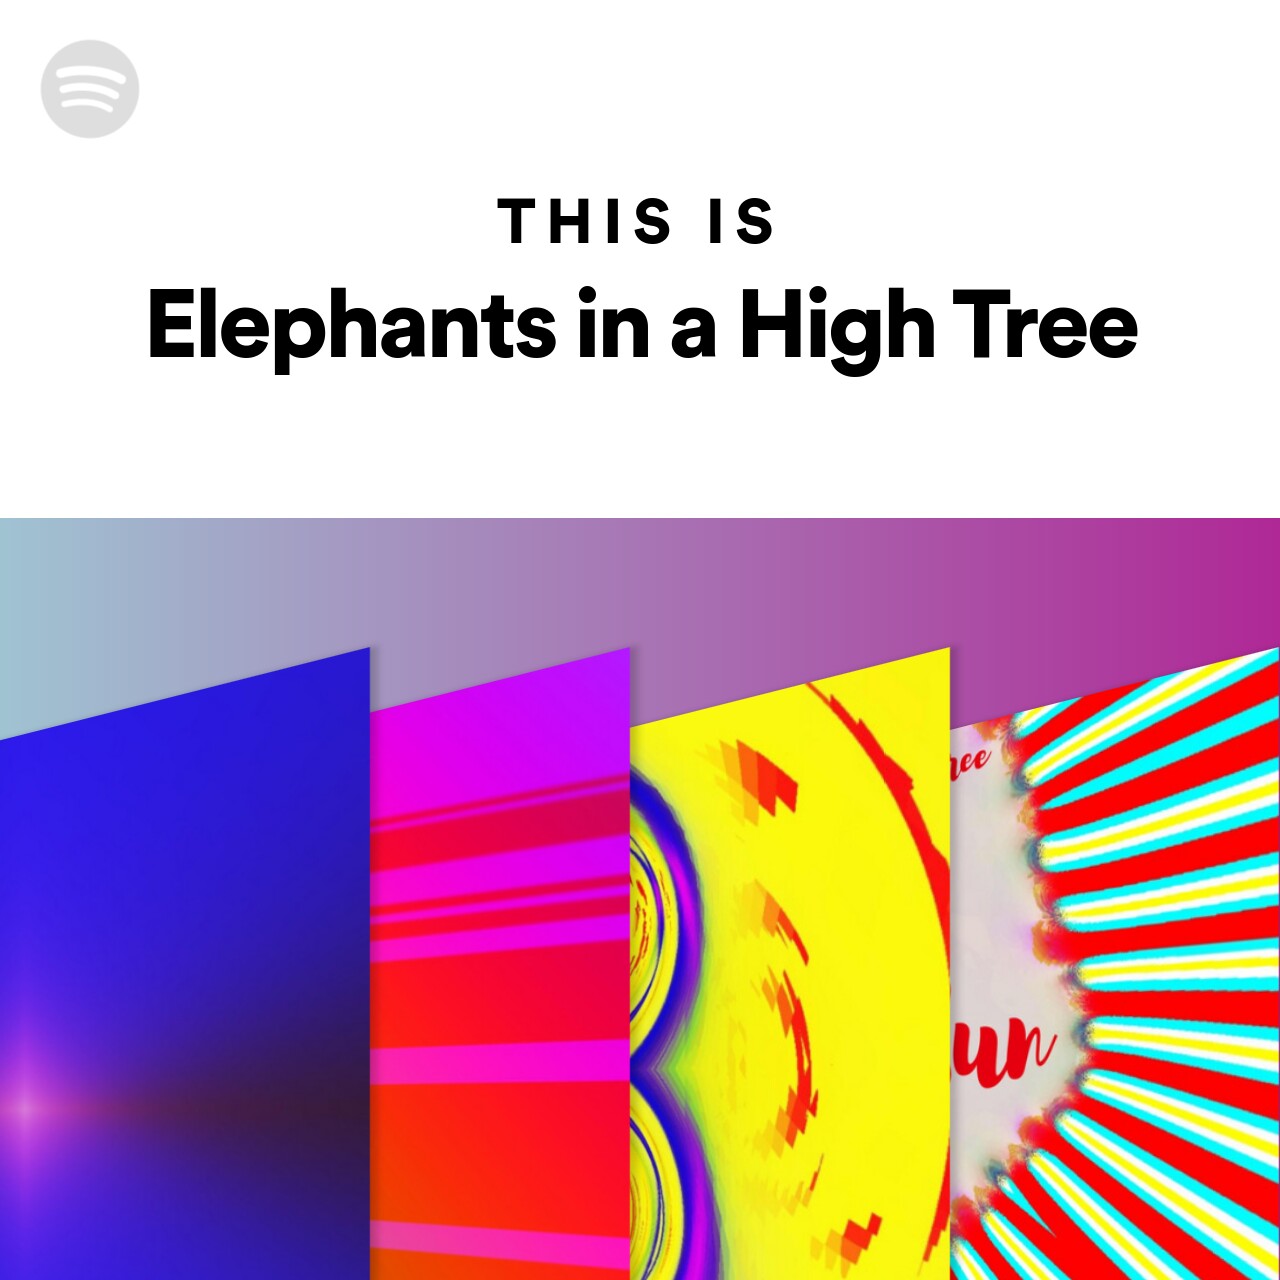 This Is Elephants in a High Tree